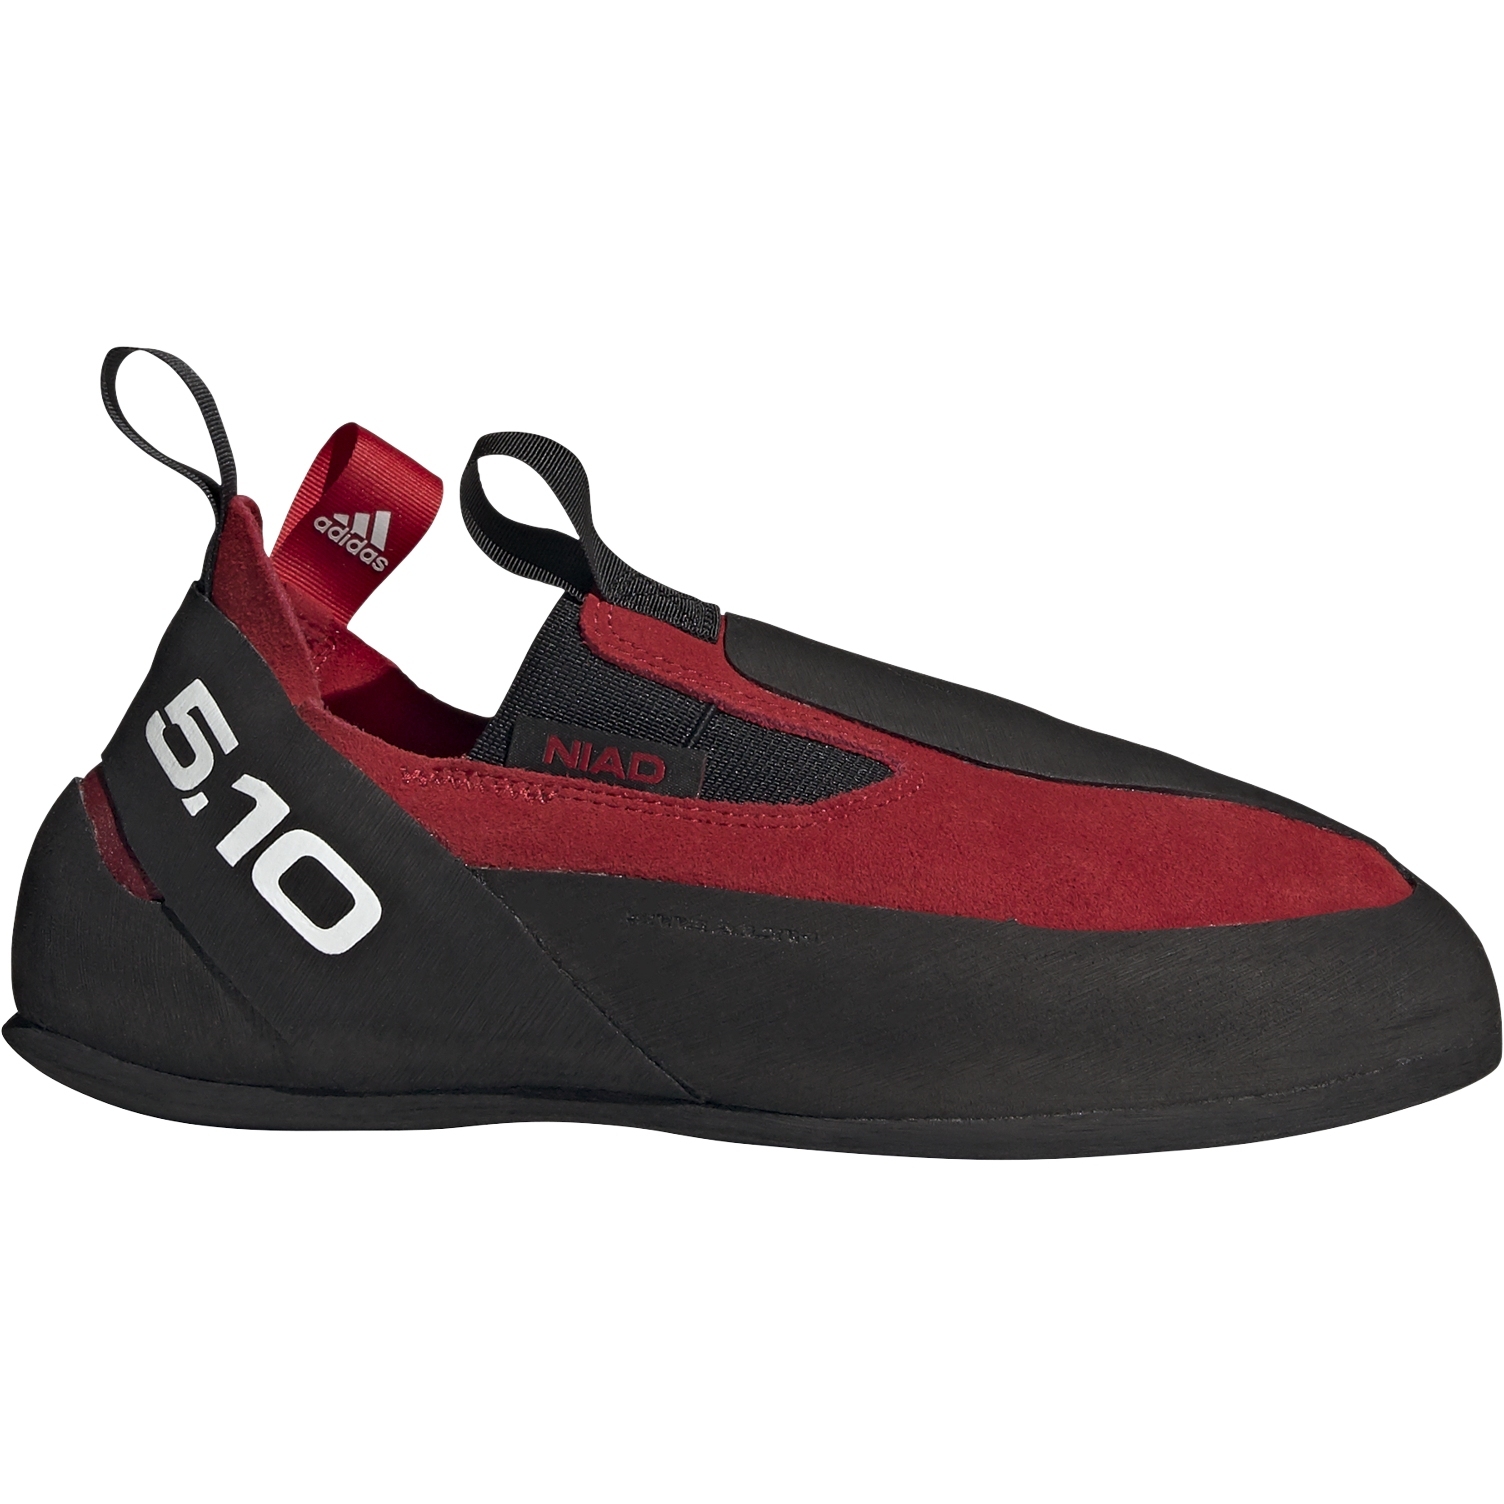 Picture of Five Ten NIAD Moccasym Climbing Shoes - Power Red / Core Black / Cloud White